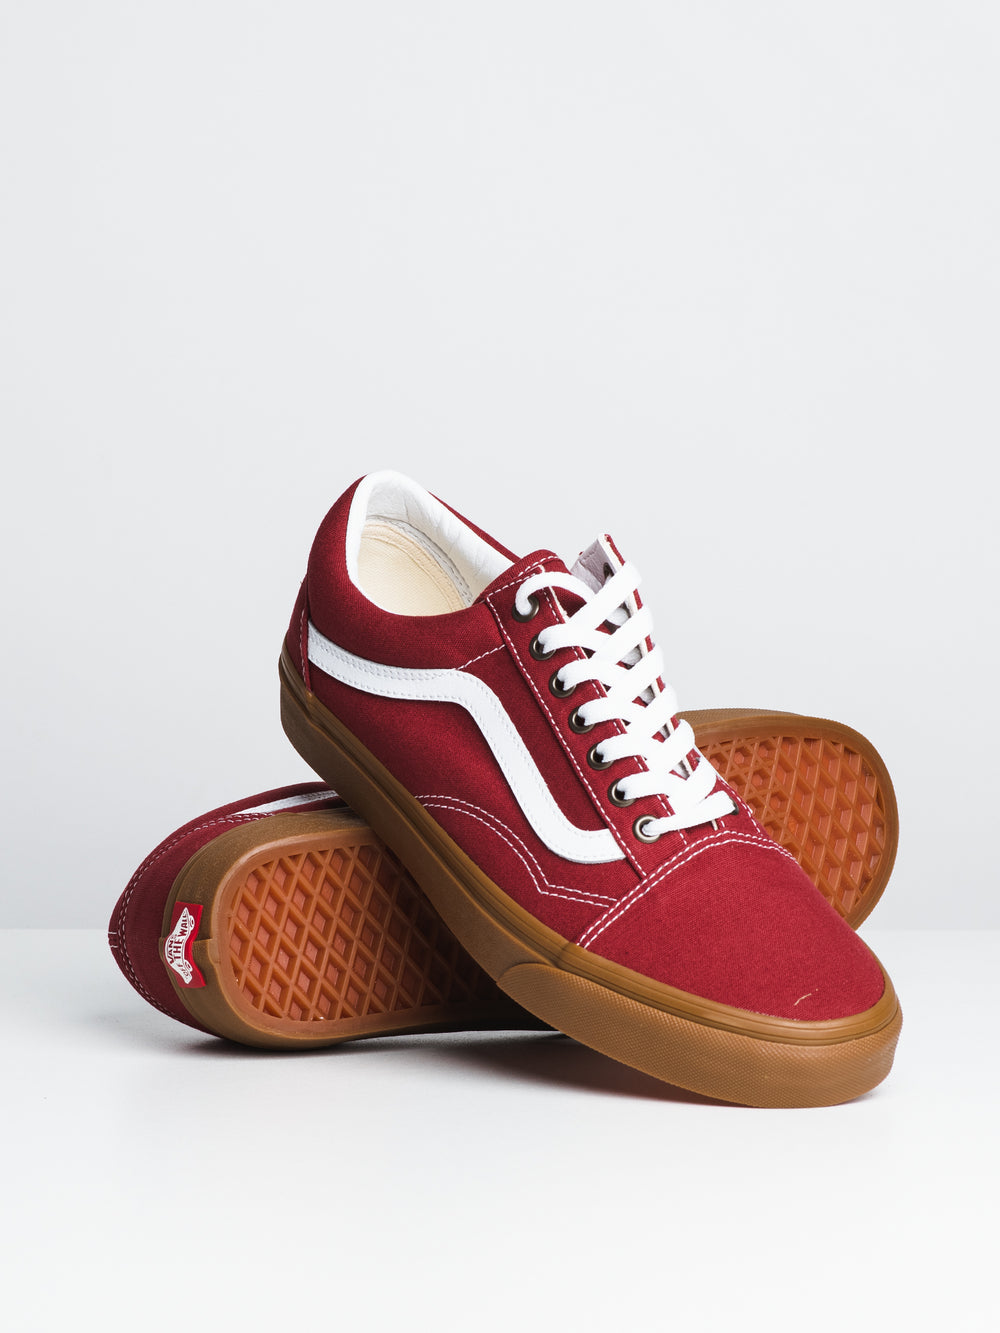 MENS OLD SKOOL - ROSEWOOD/WHITE - CLEARANCE